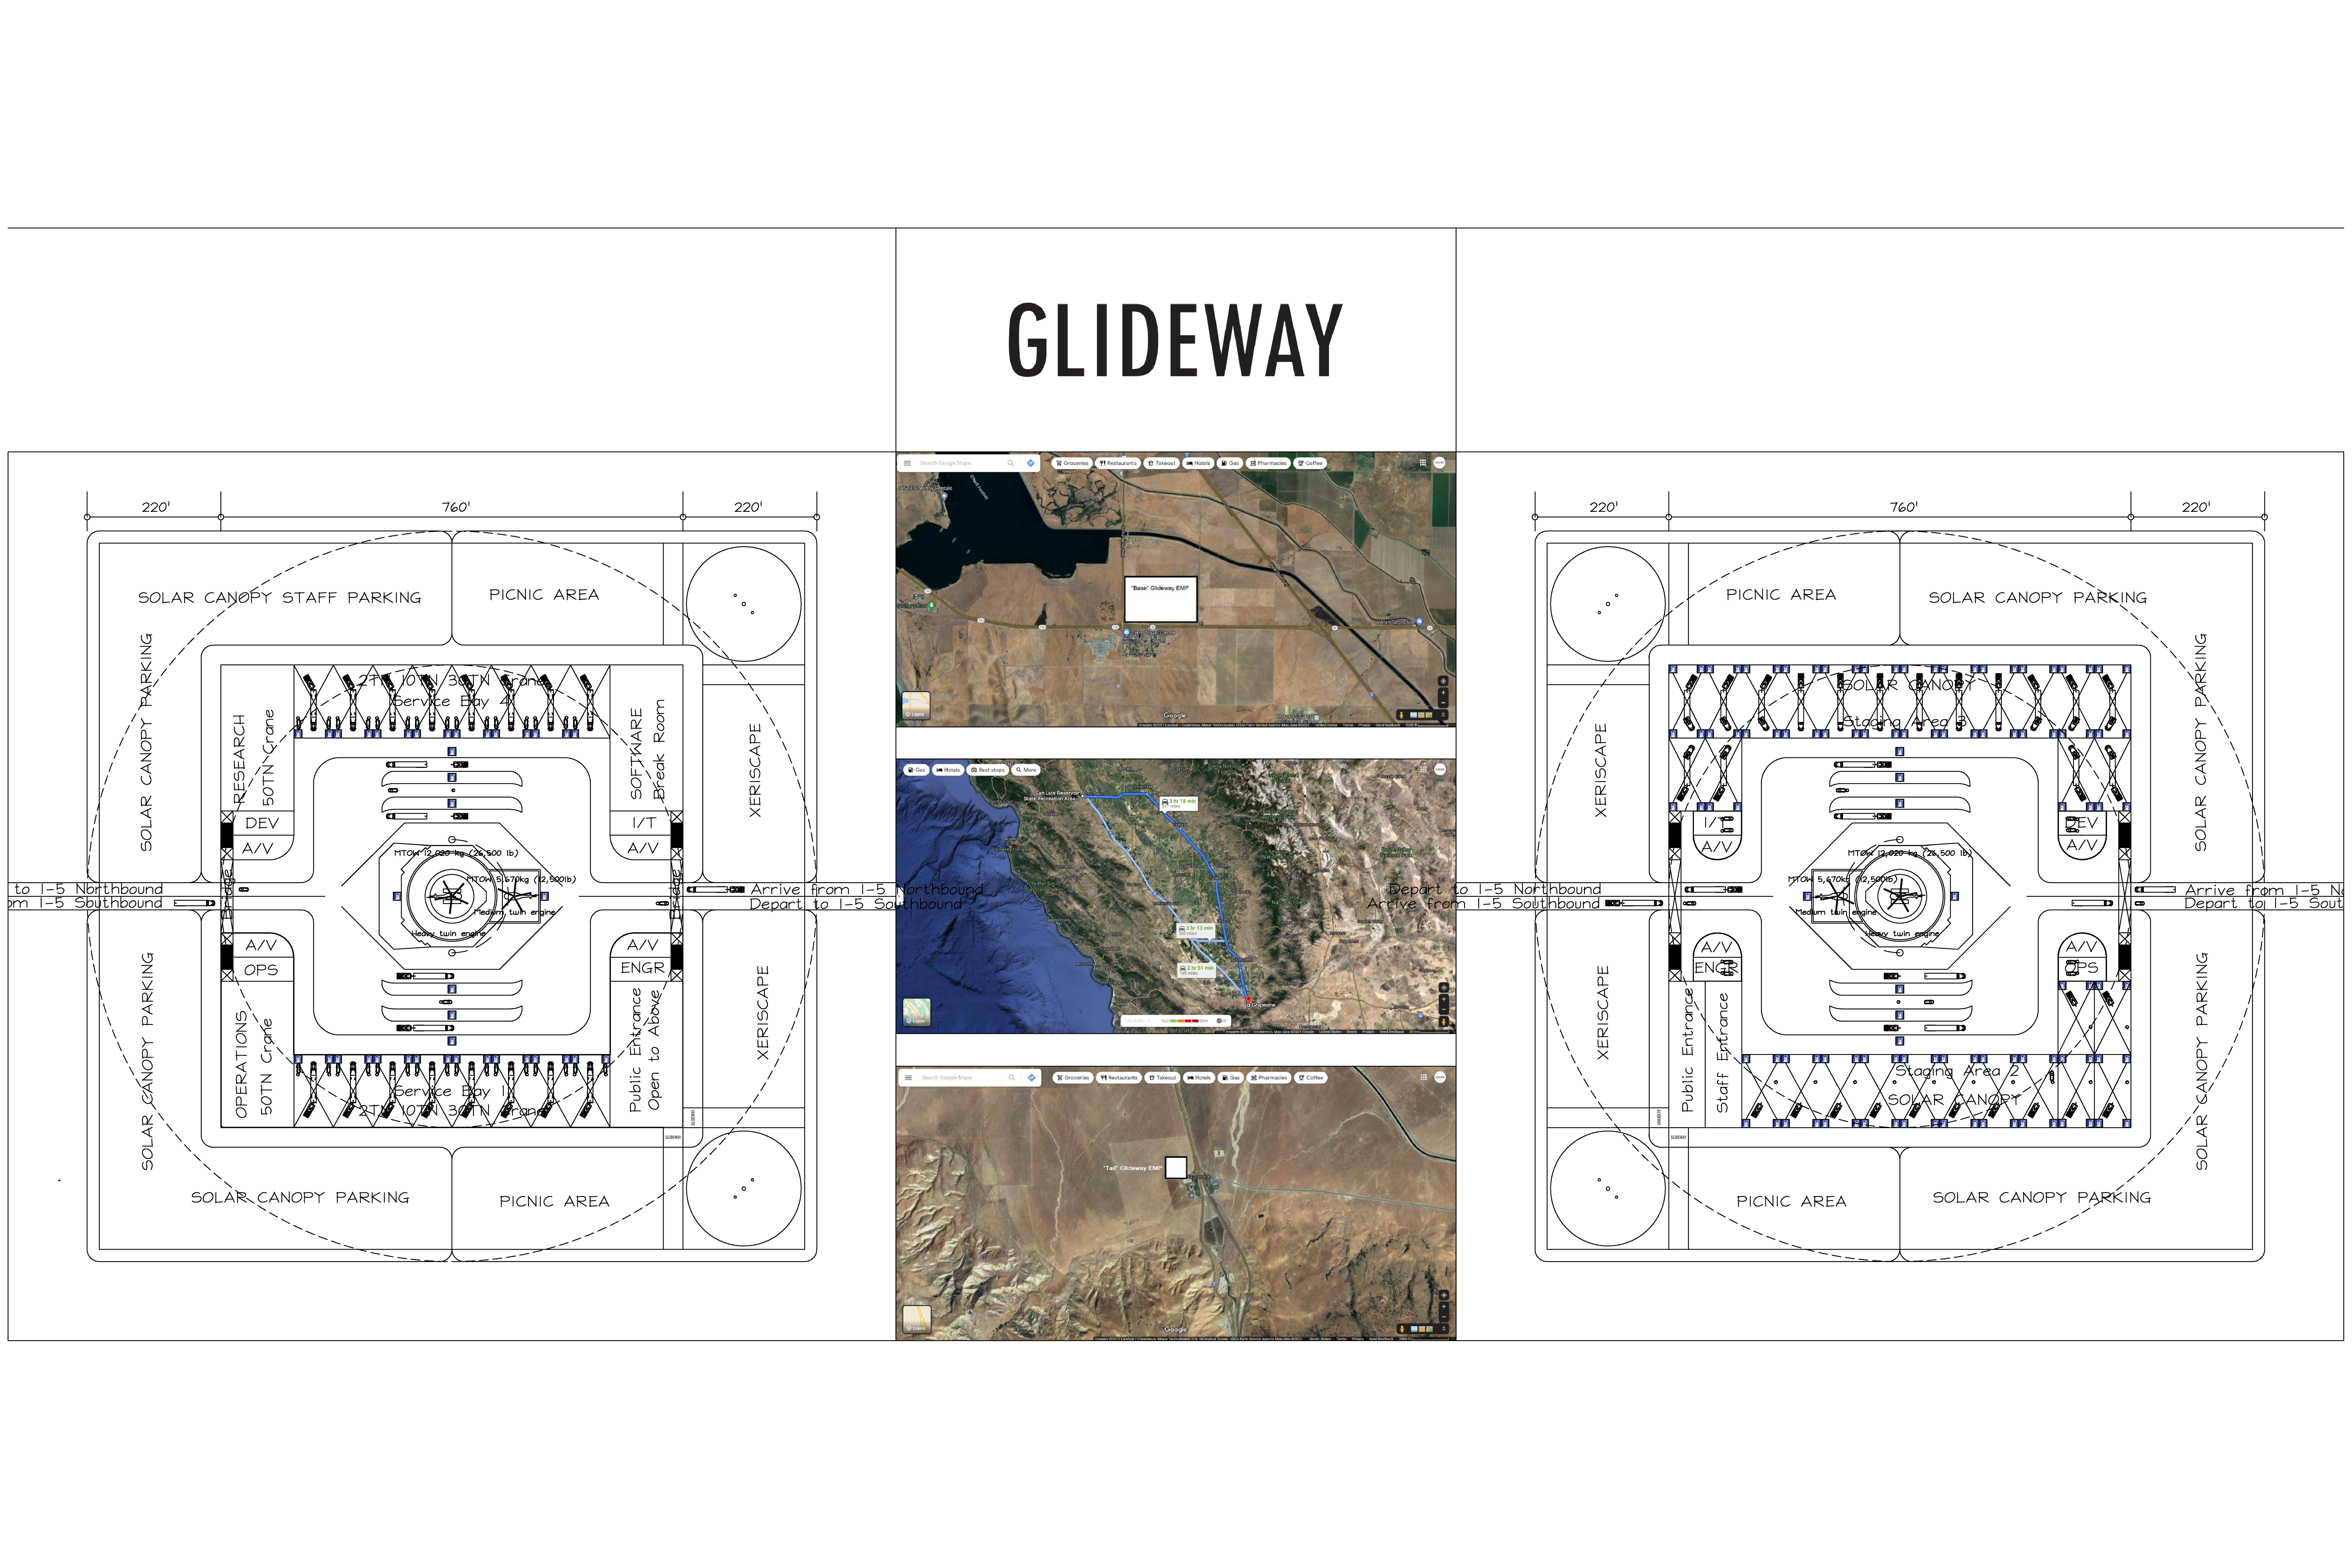 Proposed LoD 1 Space Plans for BASE and TAIL Glideway EMP Loop facilities on Interstate 5 in California